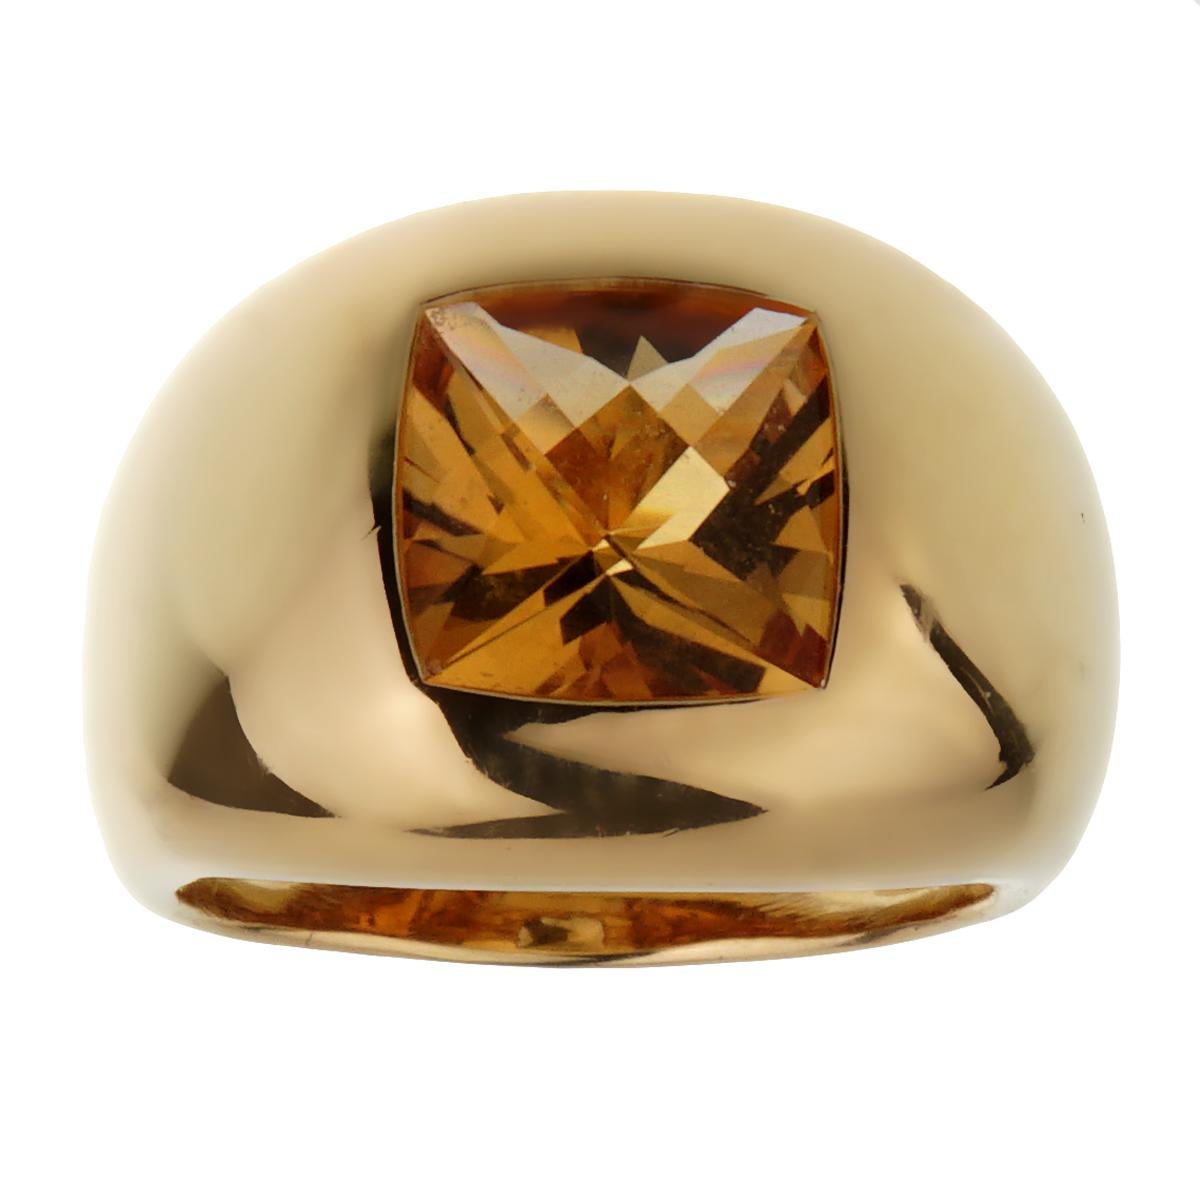 A chic Boucheron cocktail ring showcasing a step cut citrine set in 18k yellow gold. The ring measures a size 6 1/4 and can be resized.